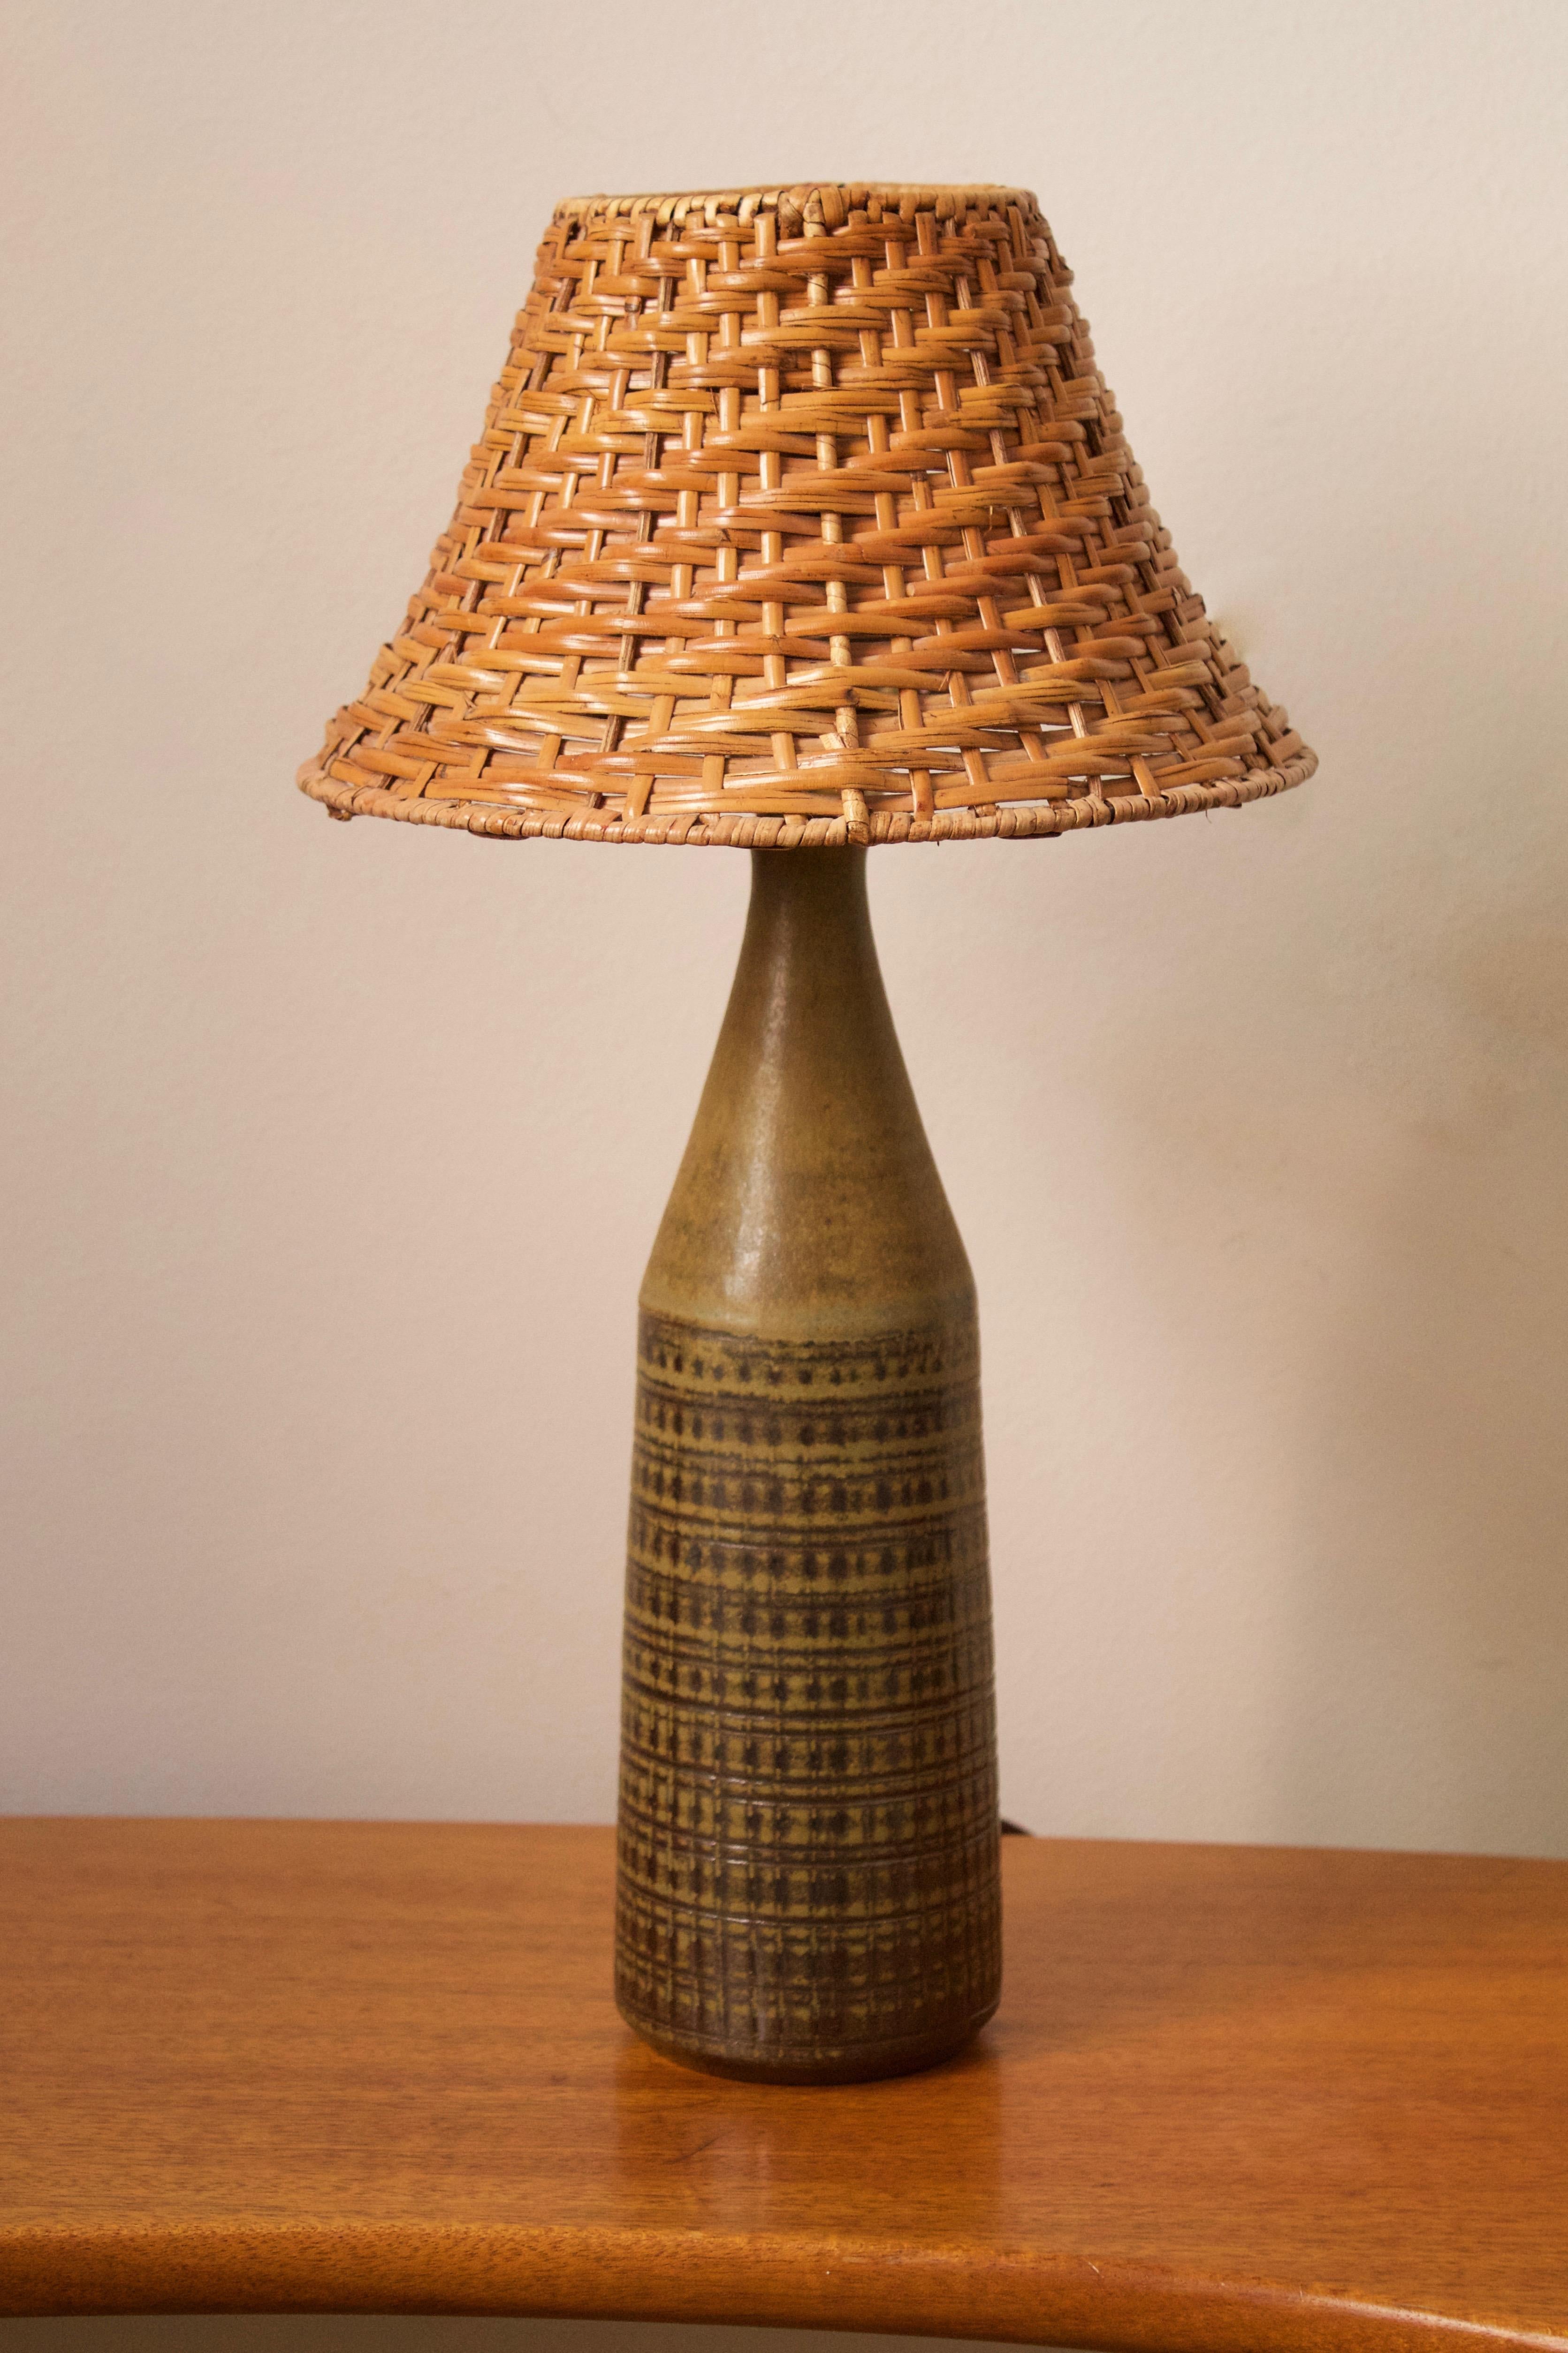 A table lamp. Designed and produced by Wallåkra, Sweden, 1960s. Features simple hand-painted and incised decoration.

Stated dimensions exclude lampshade. Height includes socket. Upon request illustrated lampshade can be included in purchase.